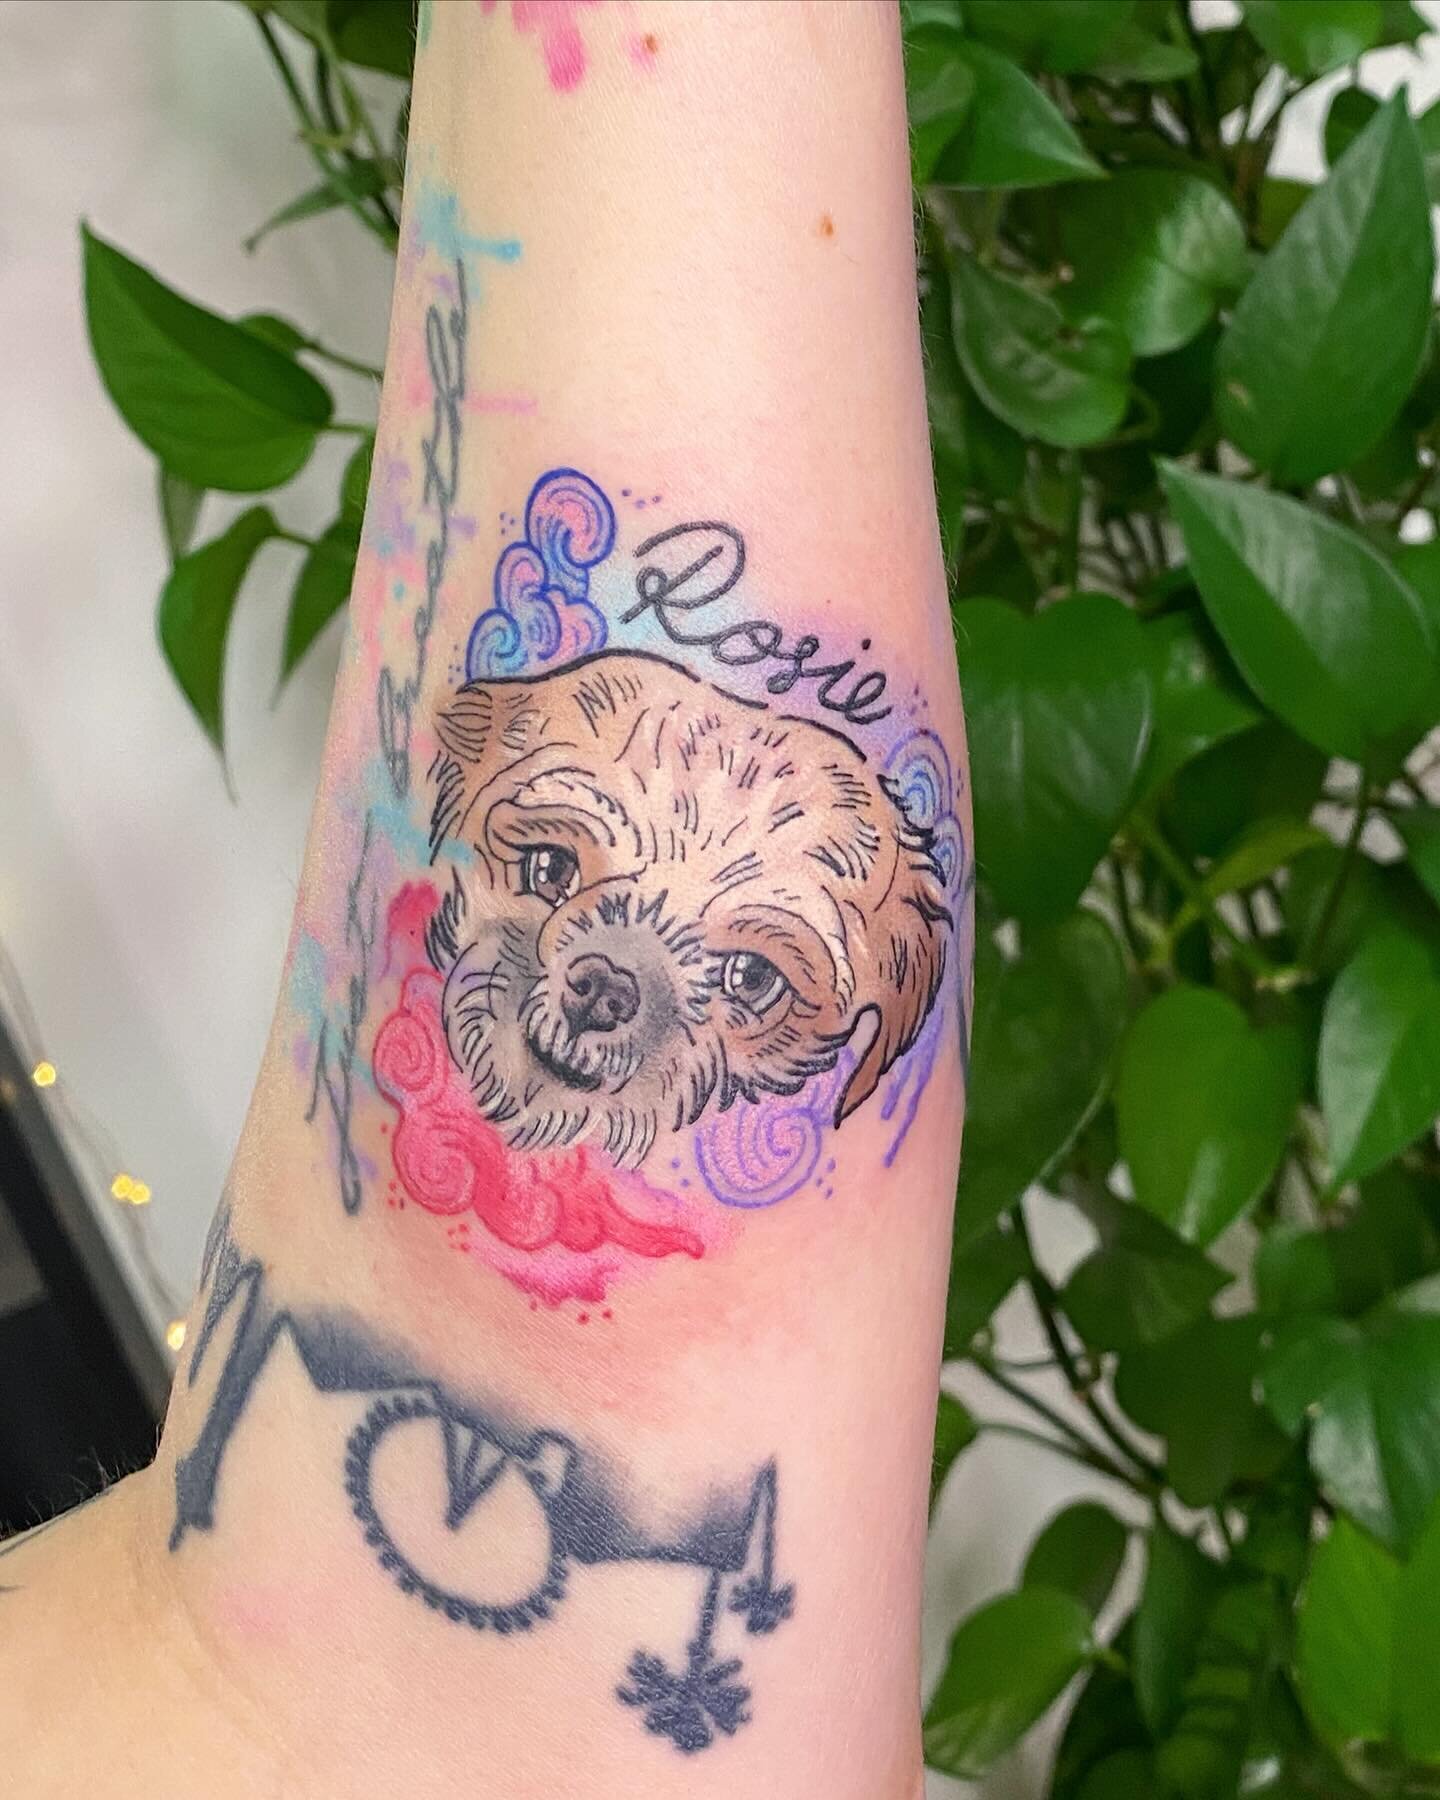 The most special teeny tiny portrait 💖 👼🏻 🐶